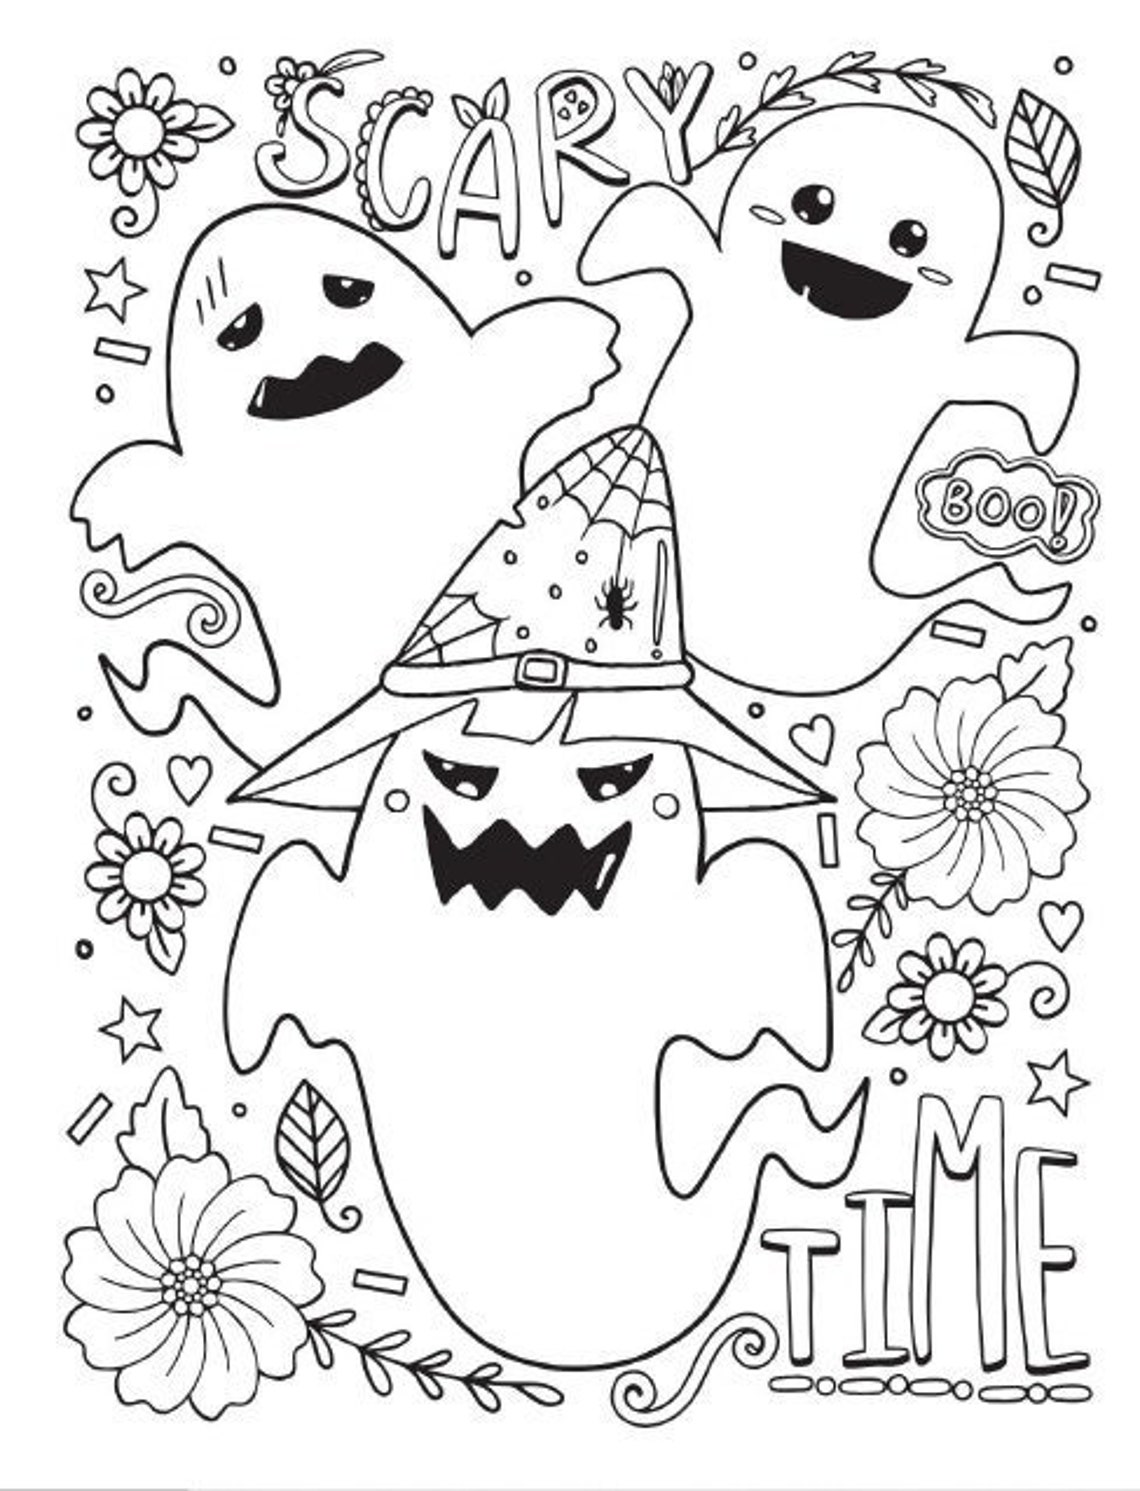 Halloween Coloring Pages and Activites - Etsy